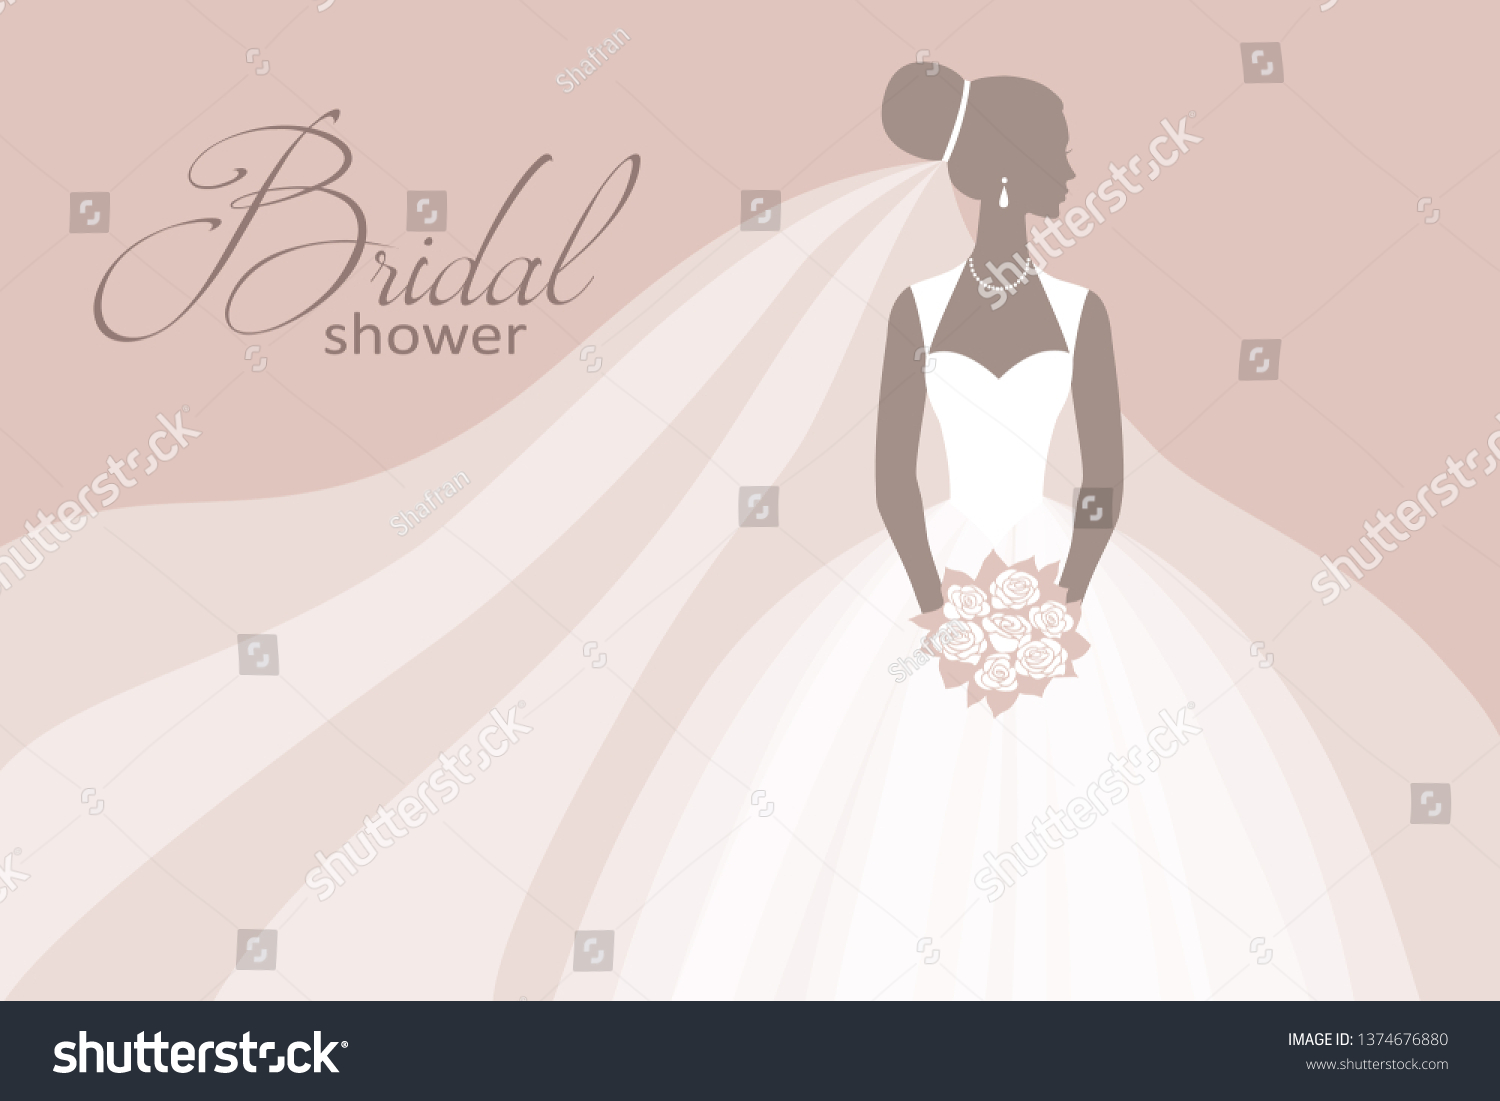 SVG of Bride in a wedding dress, holding a bouquet, vector illustration for design: invitation, greeting card, template for the bride show. svg